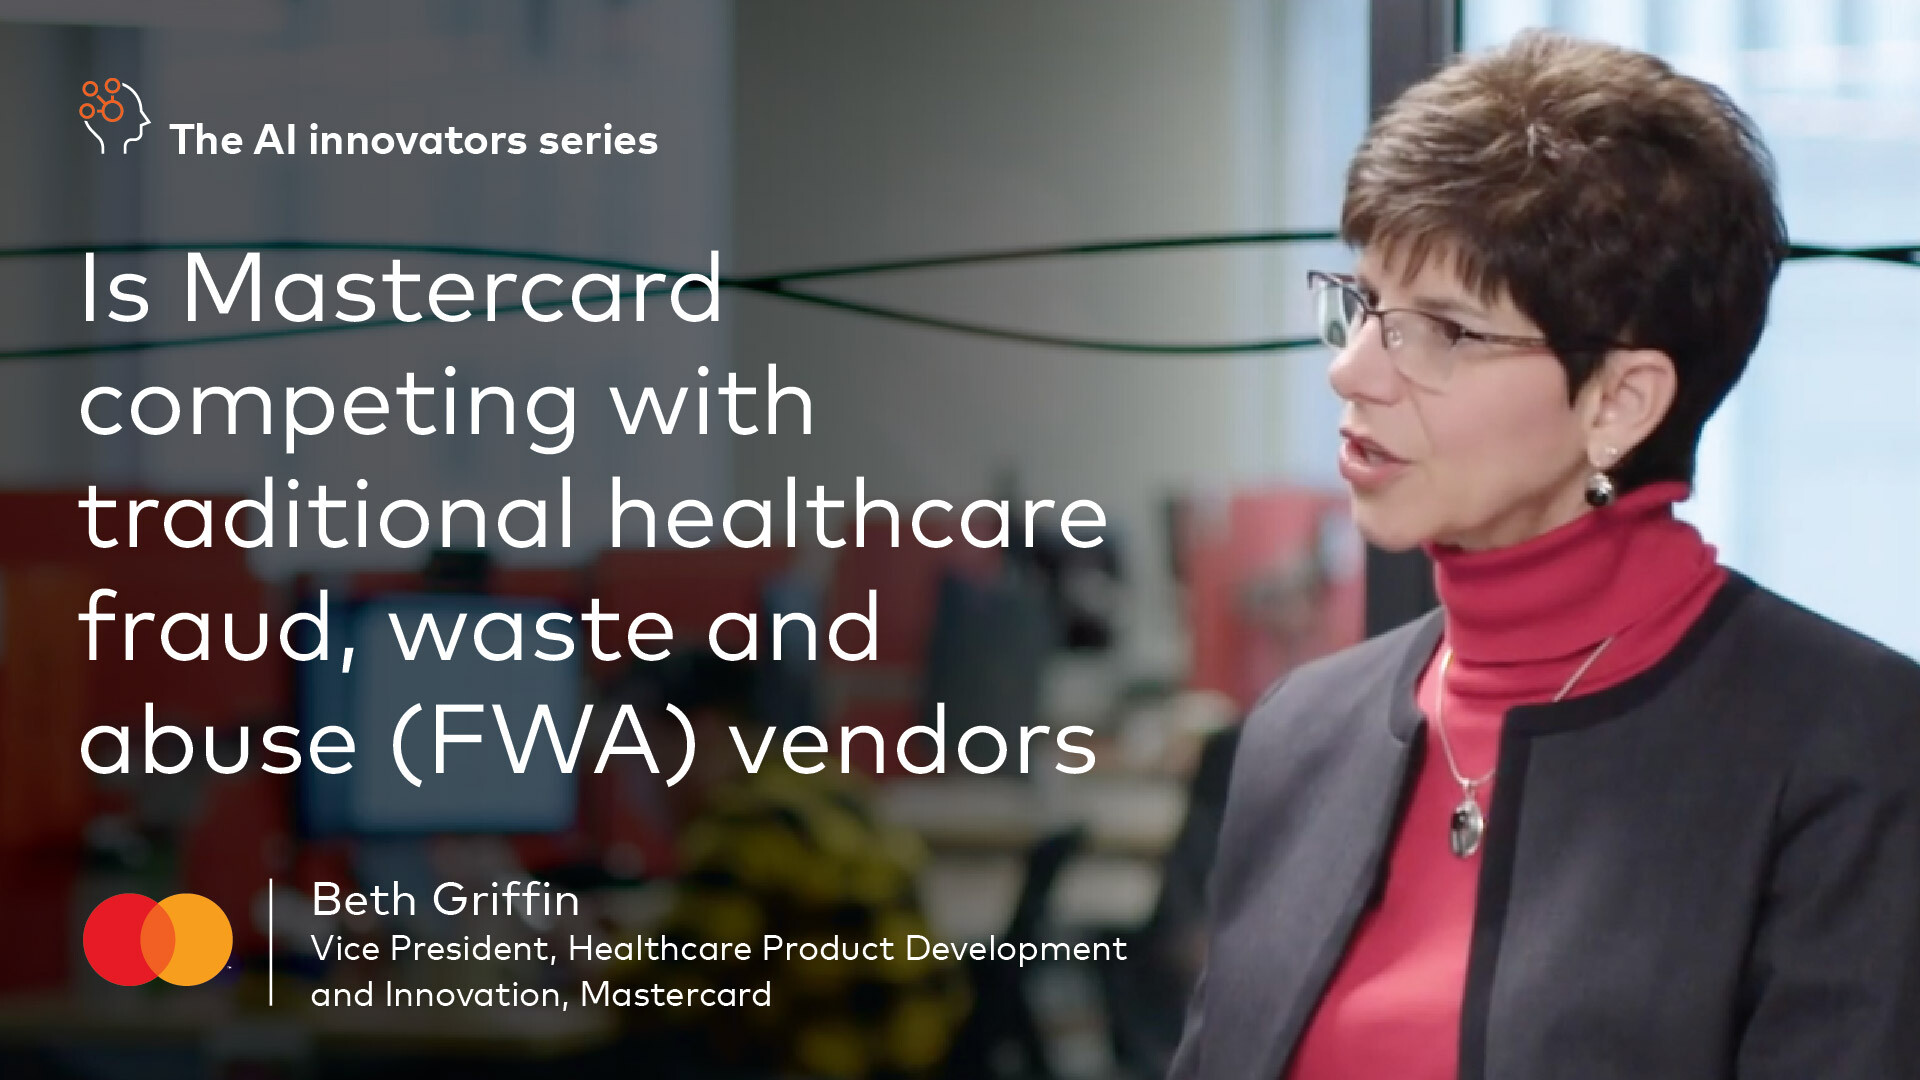 Is Mastercard competing with traditional healthcare fraud, waste and abuse (FWA) vendors